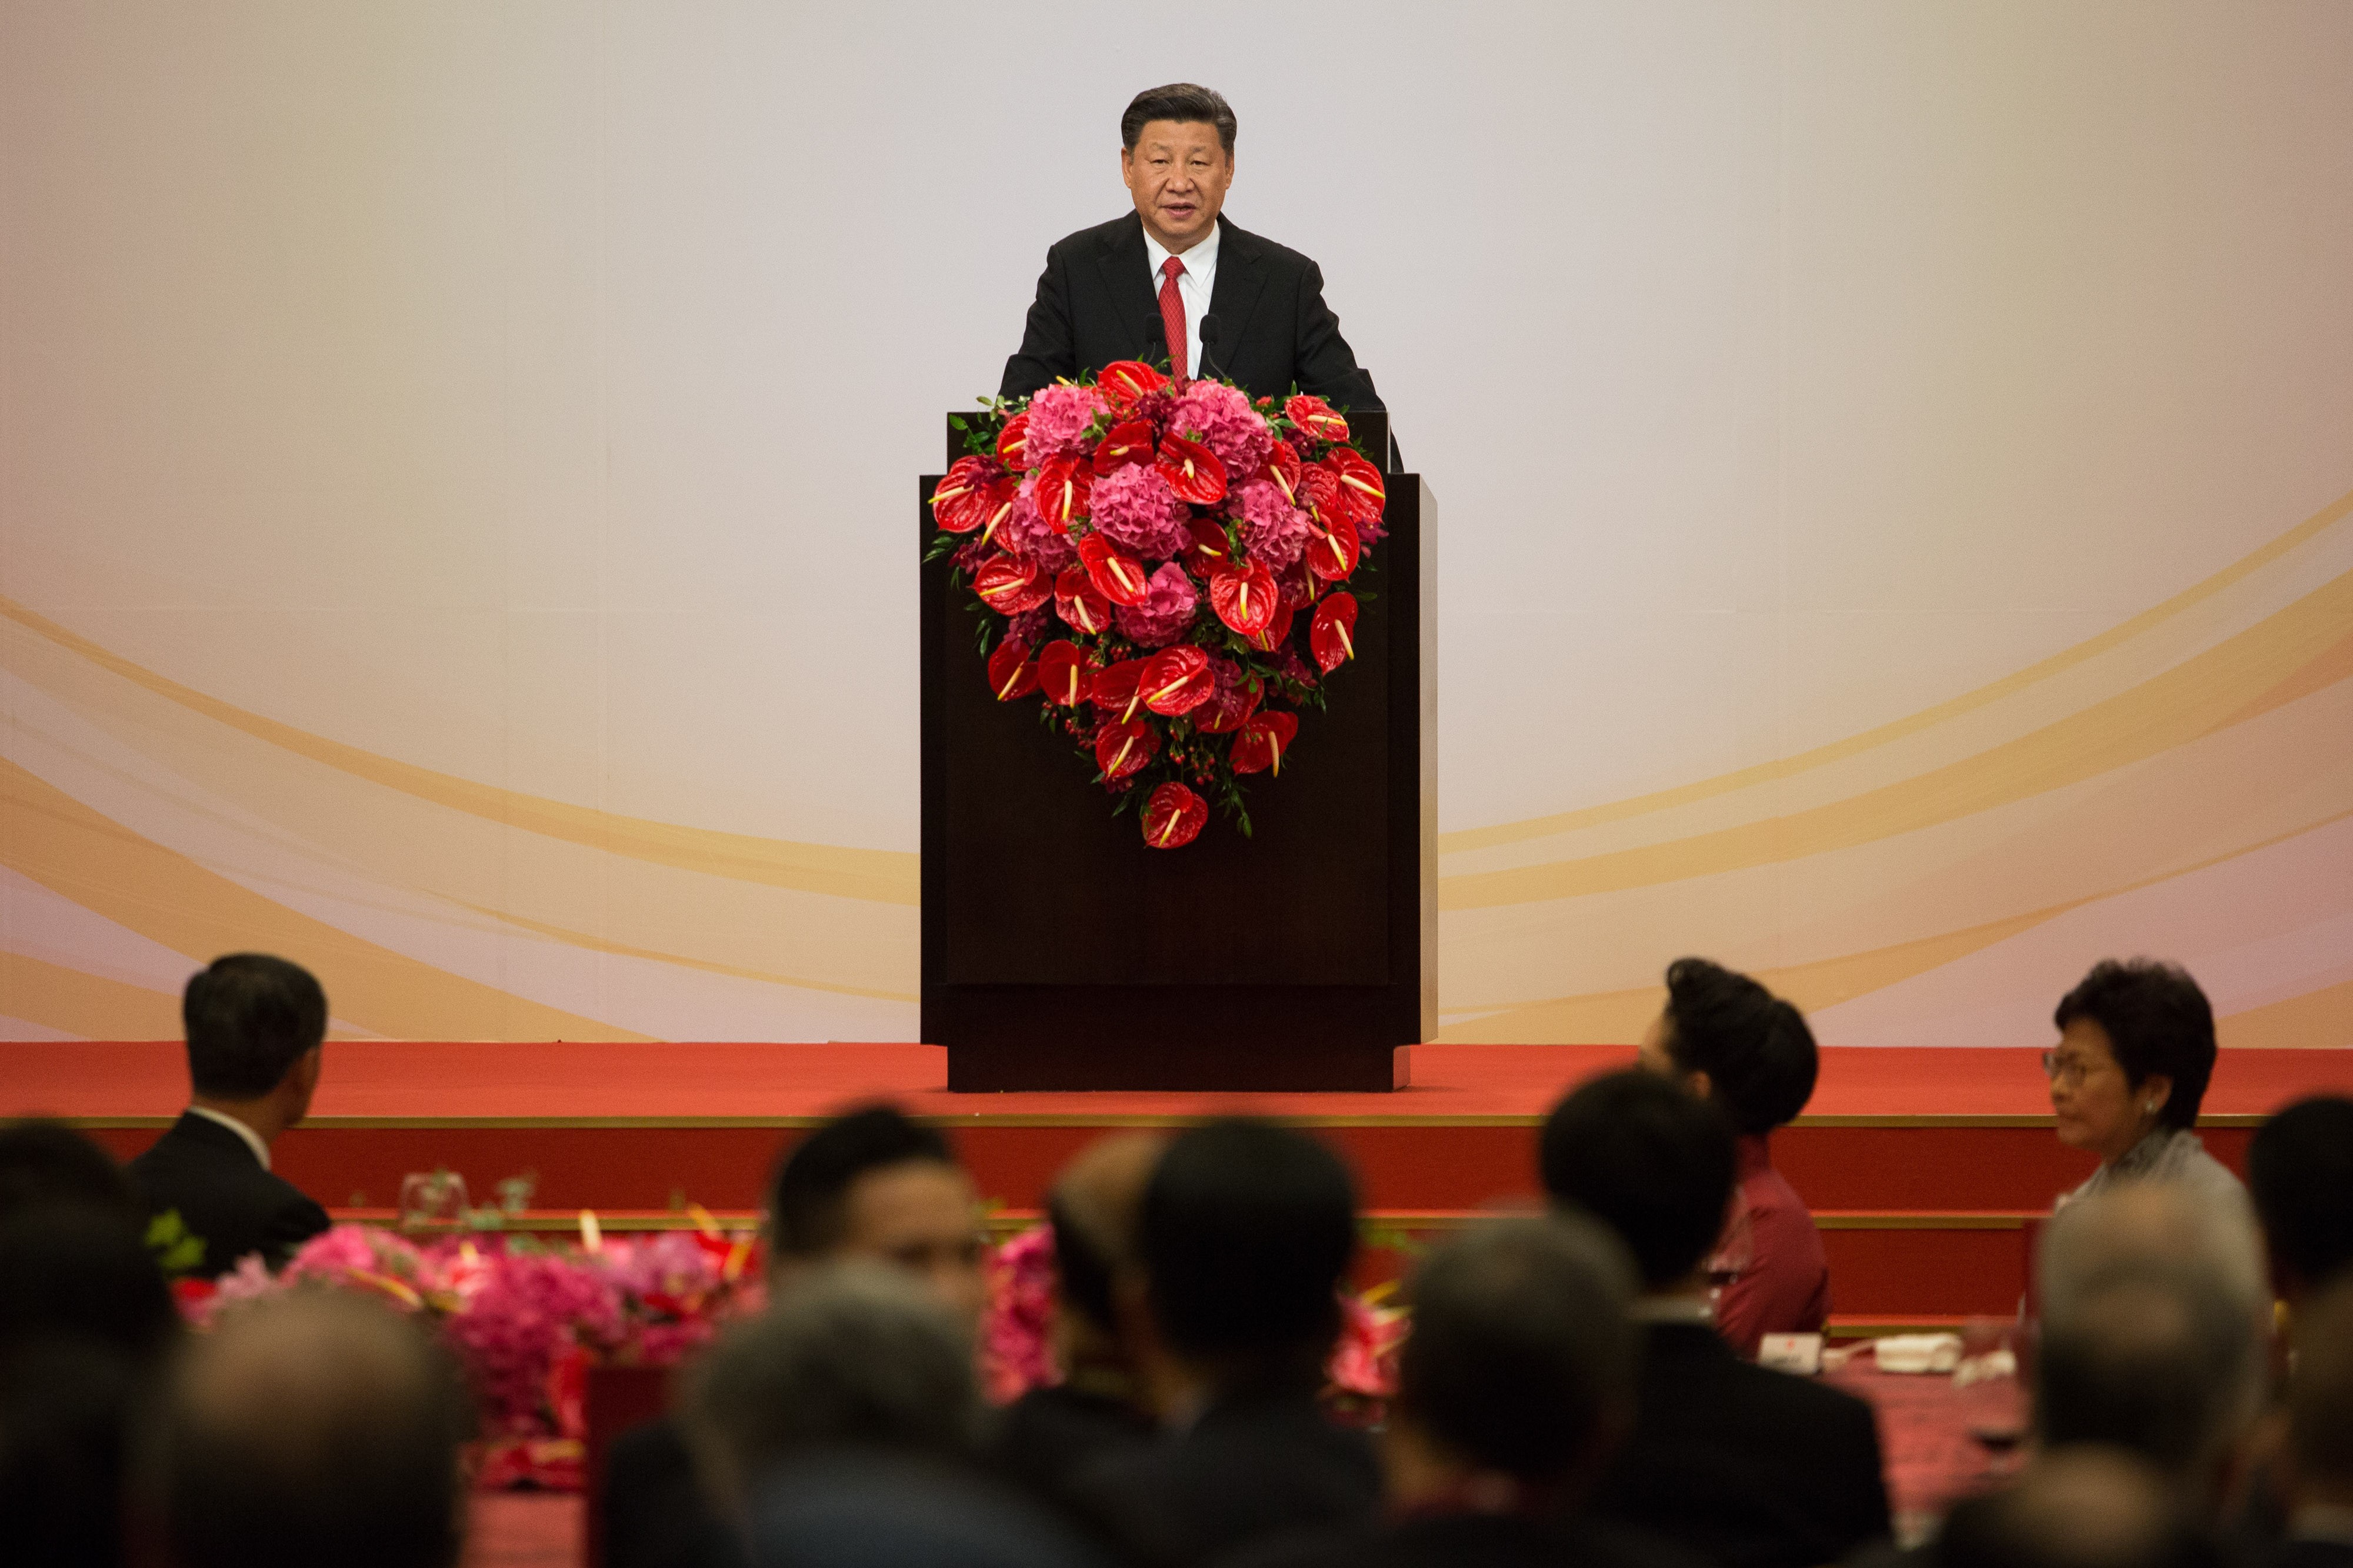 Xi Jinping is addressing a banquet attended by more than 300 representatives from the business, social and political sectors in Hong Kong. Photo: Bloomberg